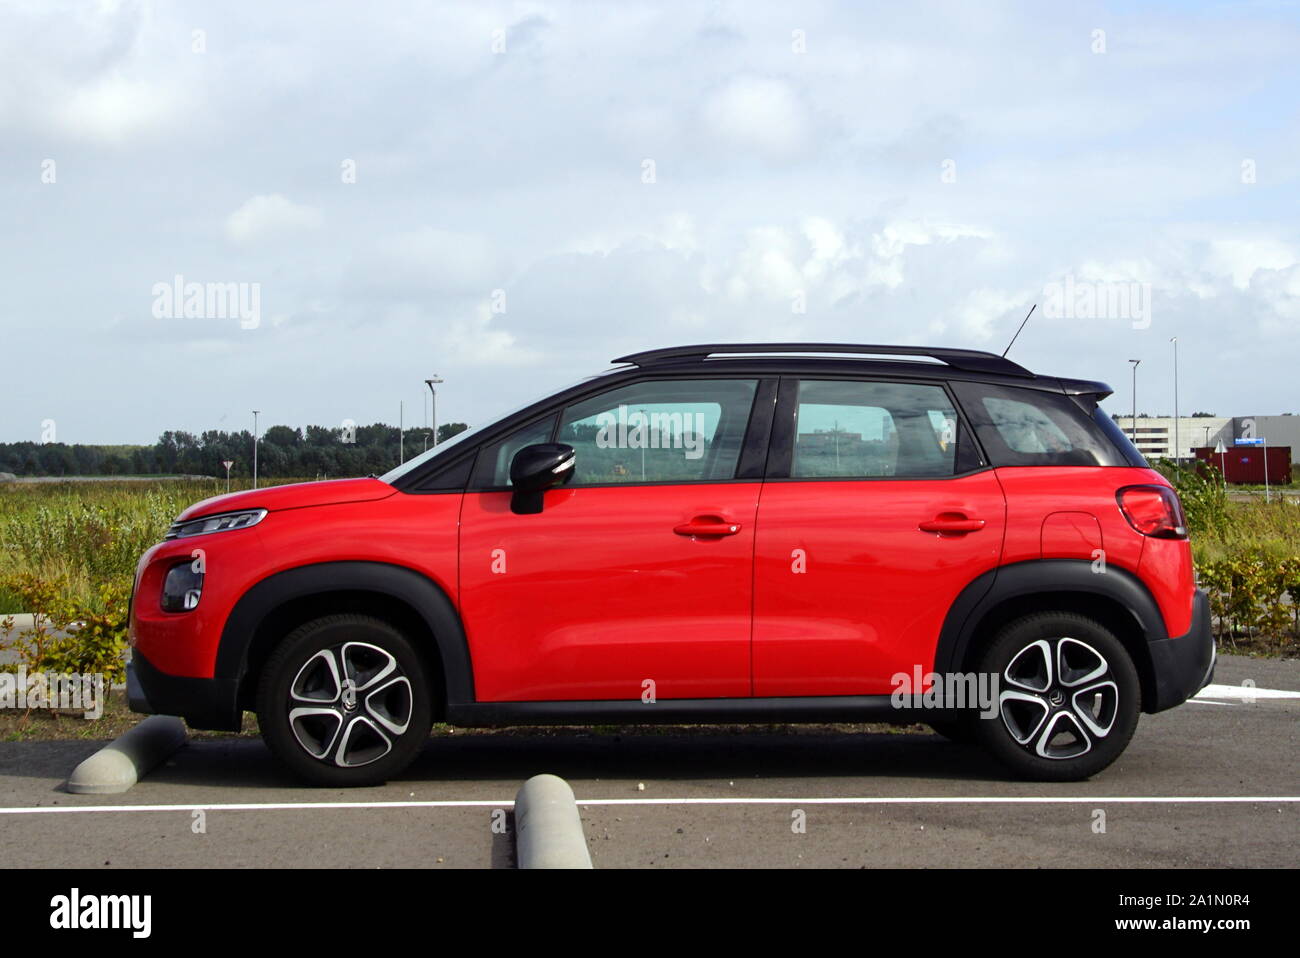 Almere, the Netherland - September 20, 2019: Red Citroen c3 aircross parked on a public parking lot. Stock Photo